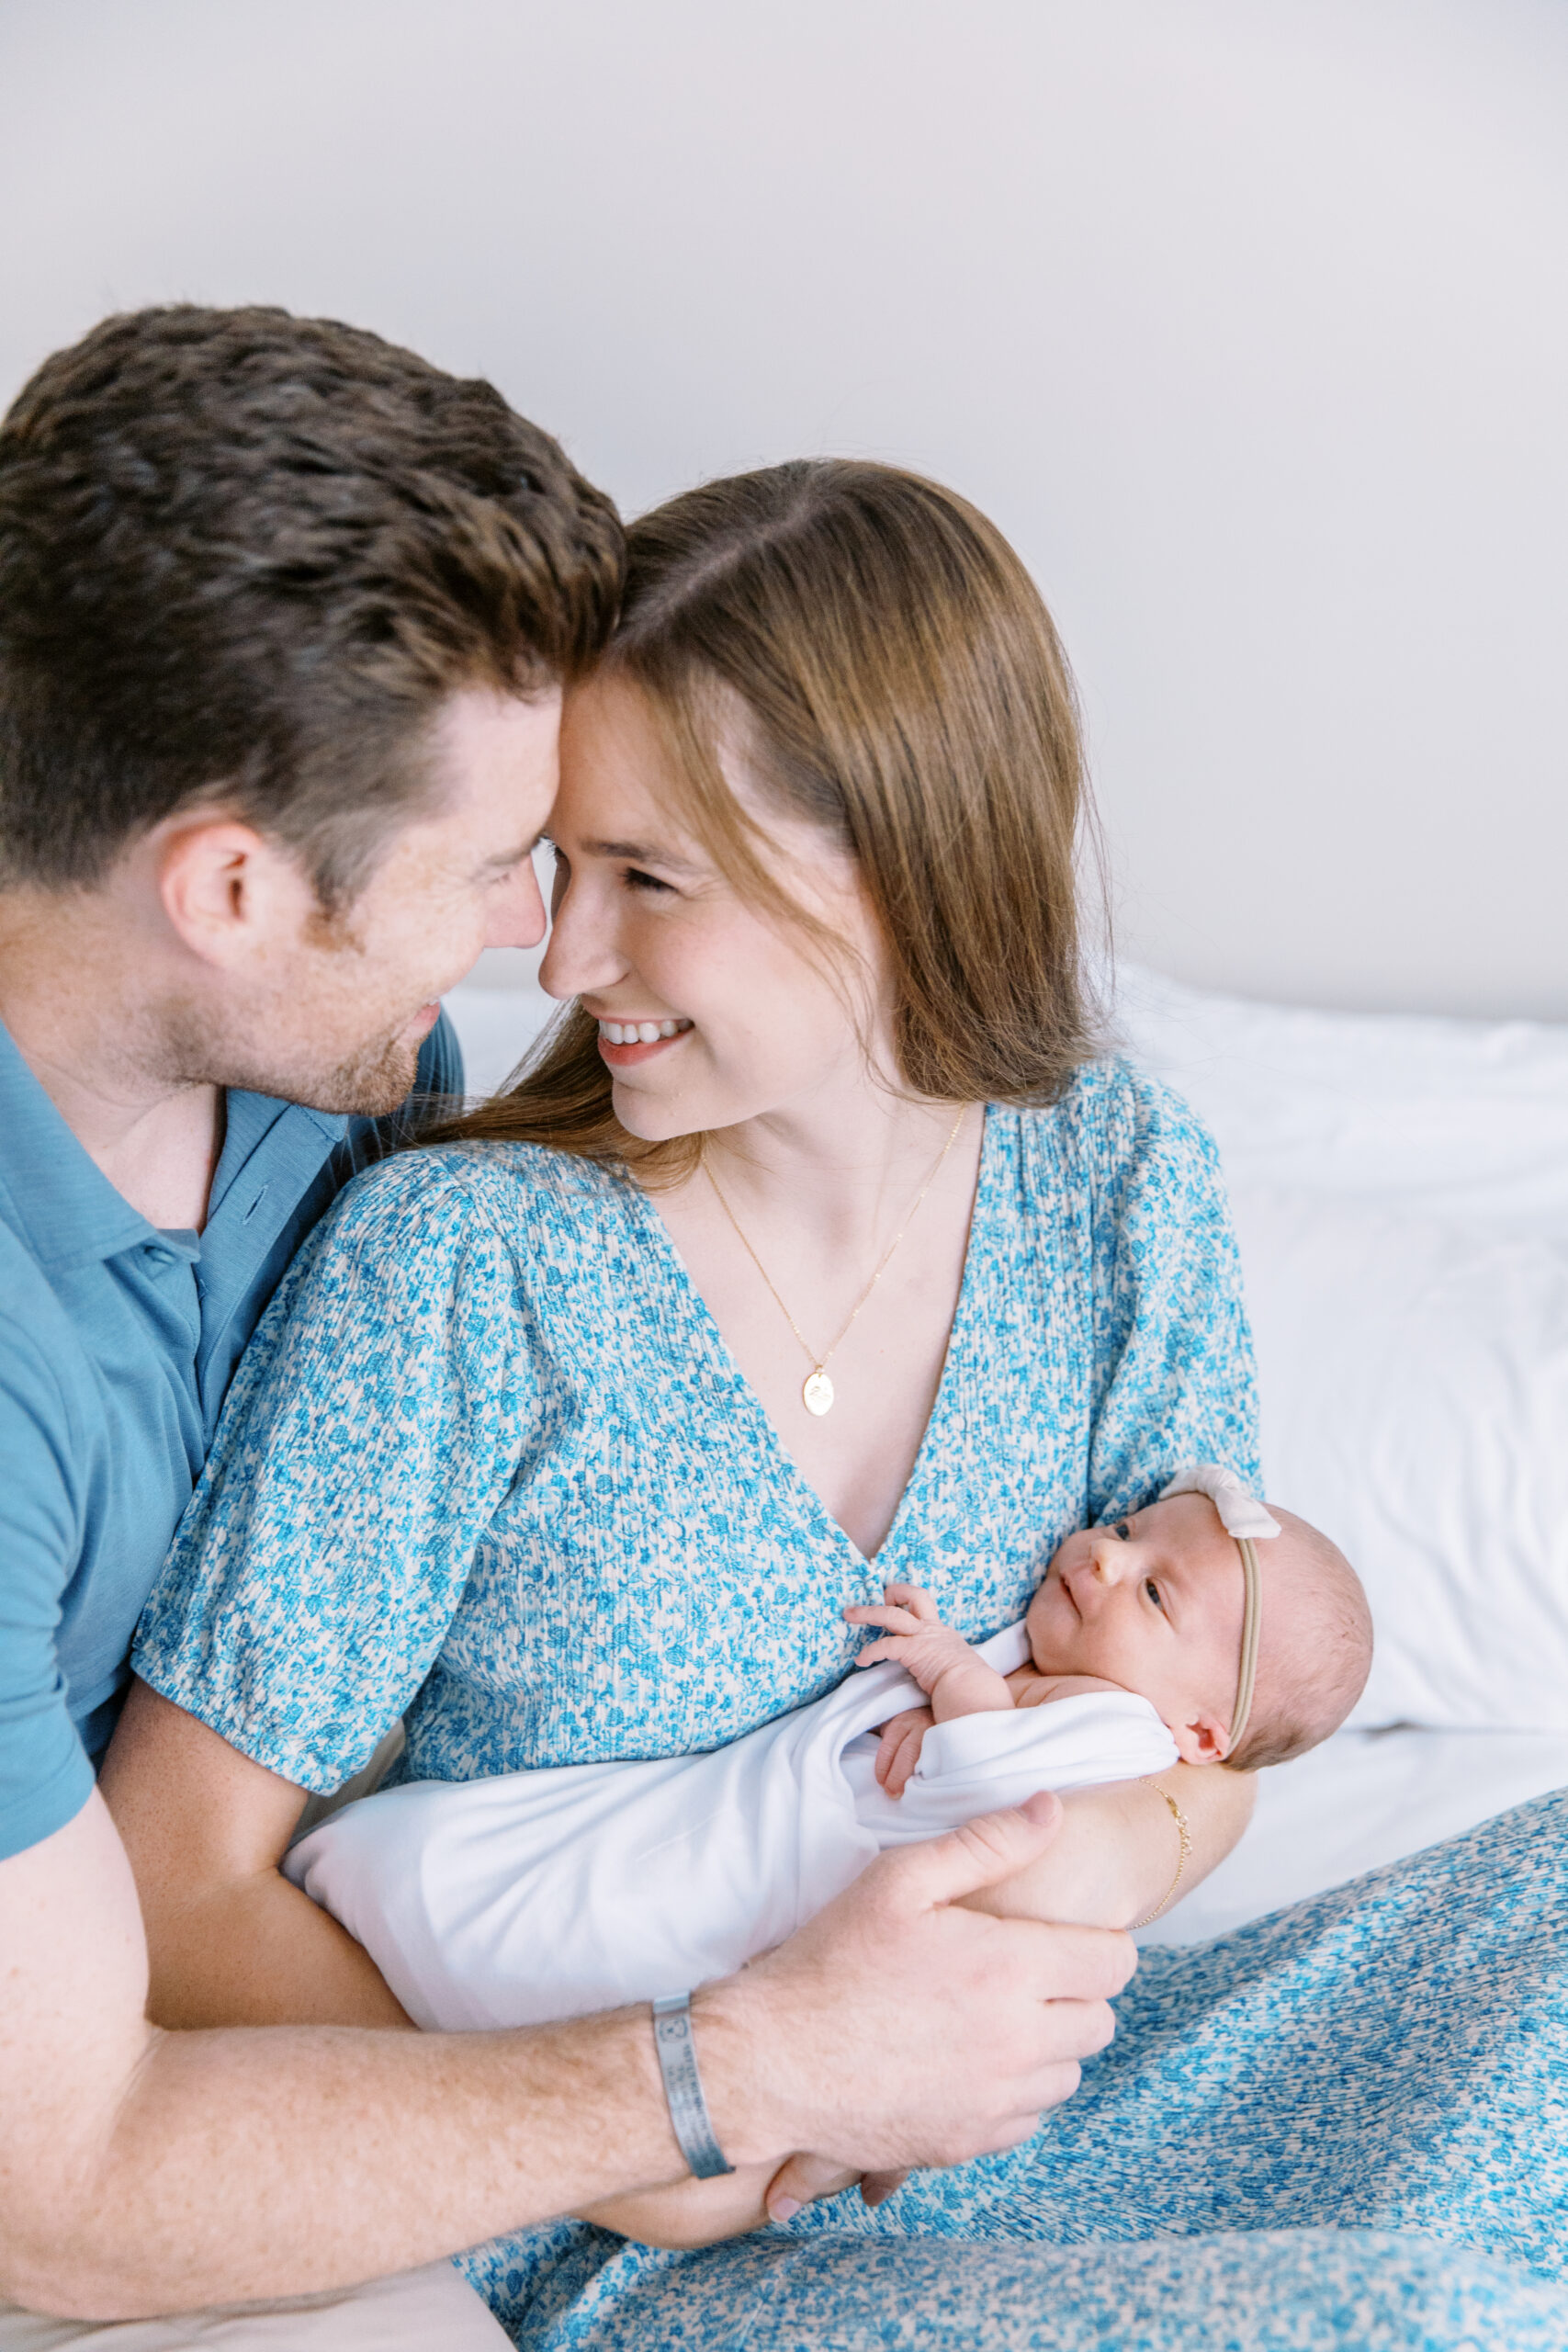 Couple looking at each other lovingly while holding newborn baby